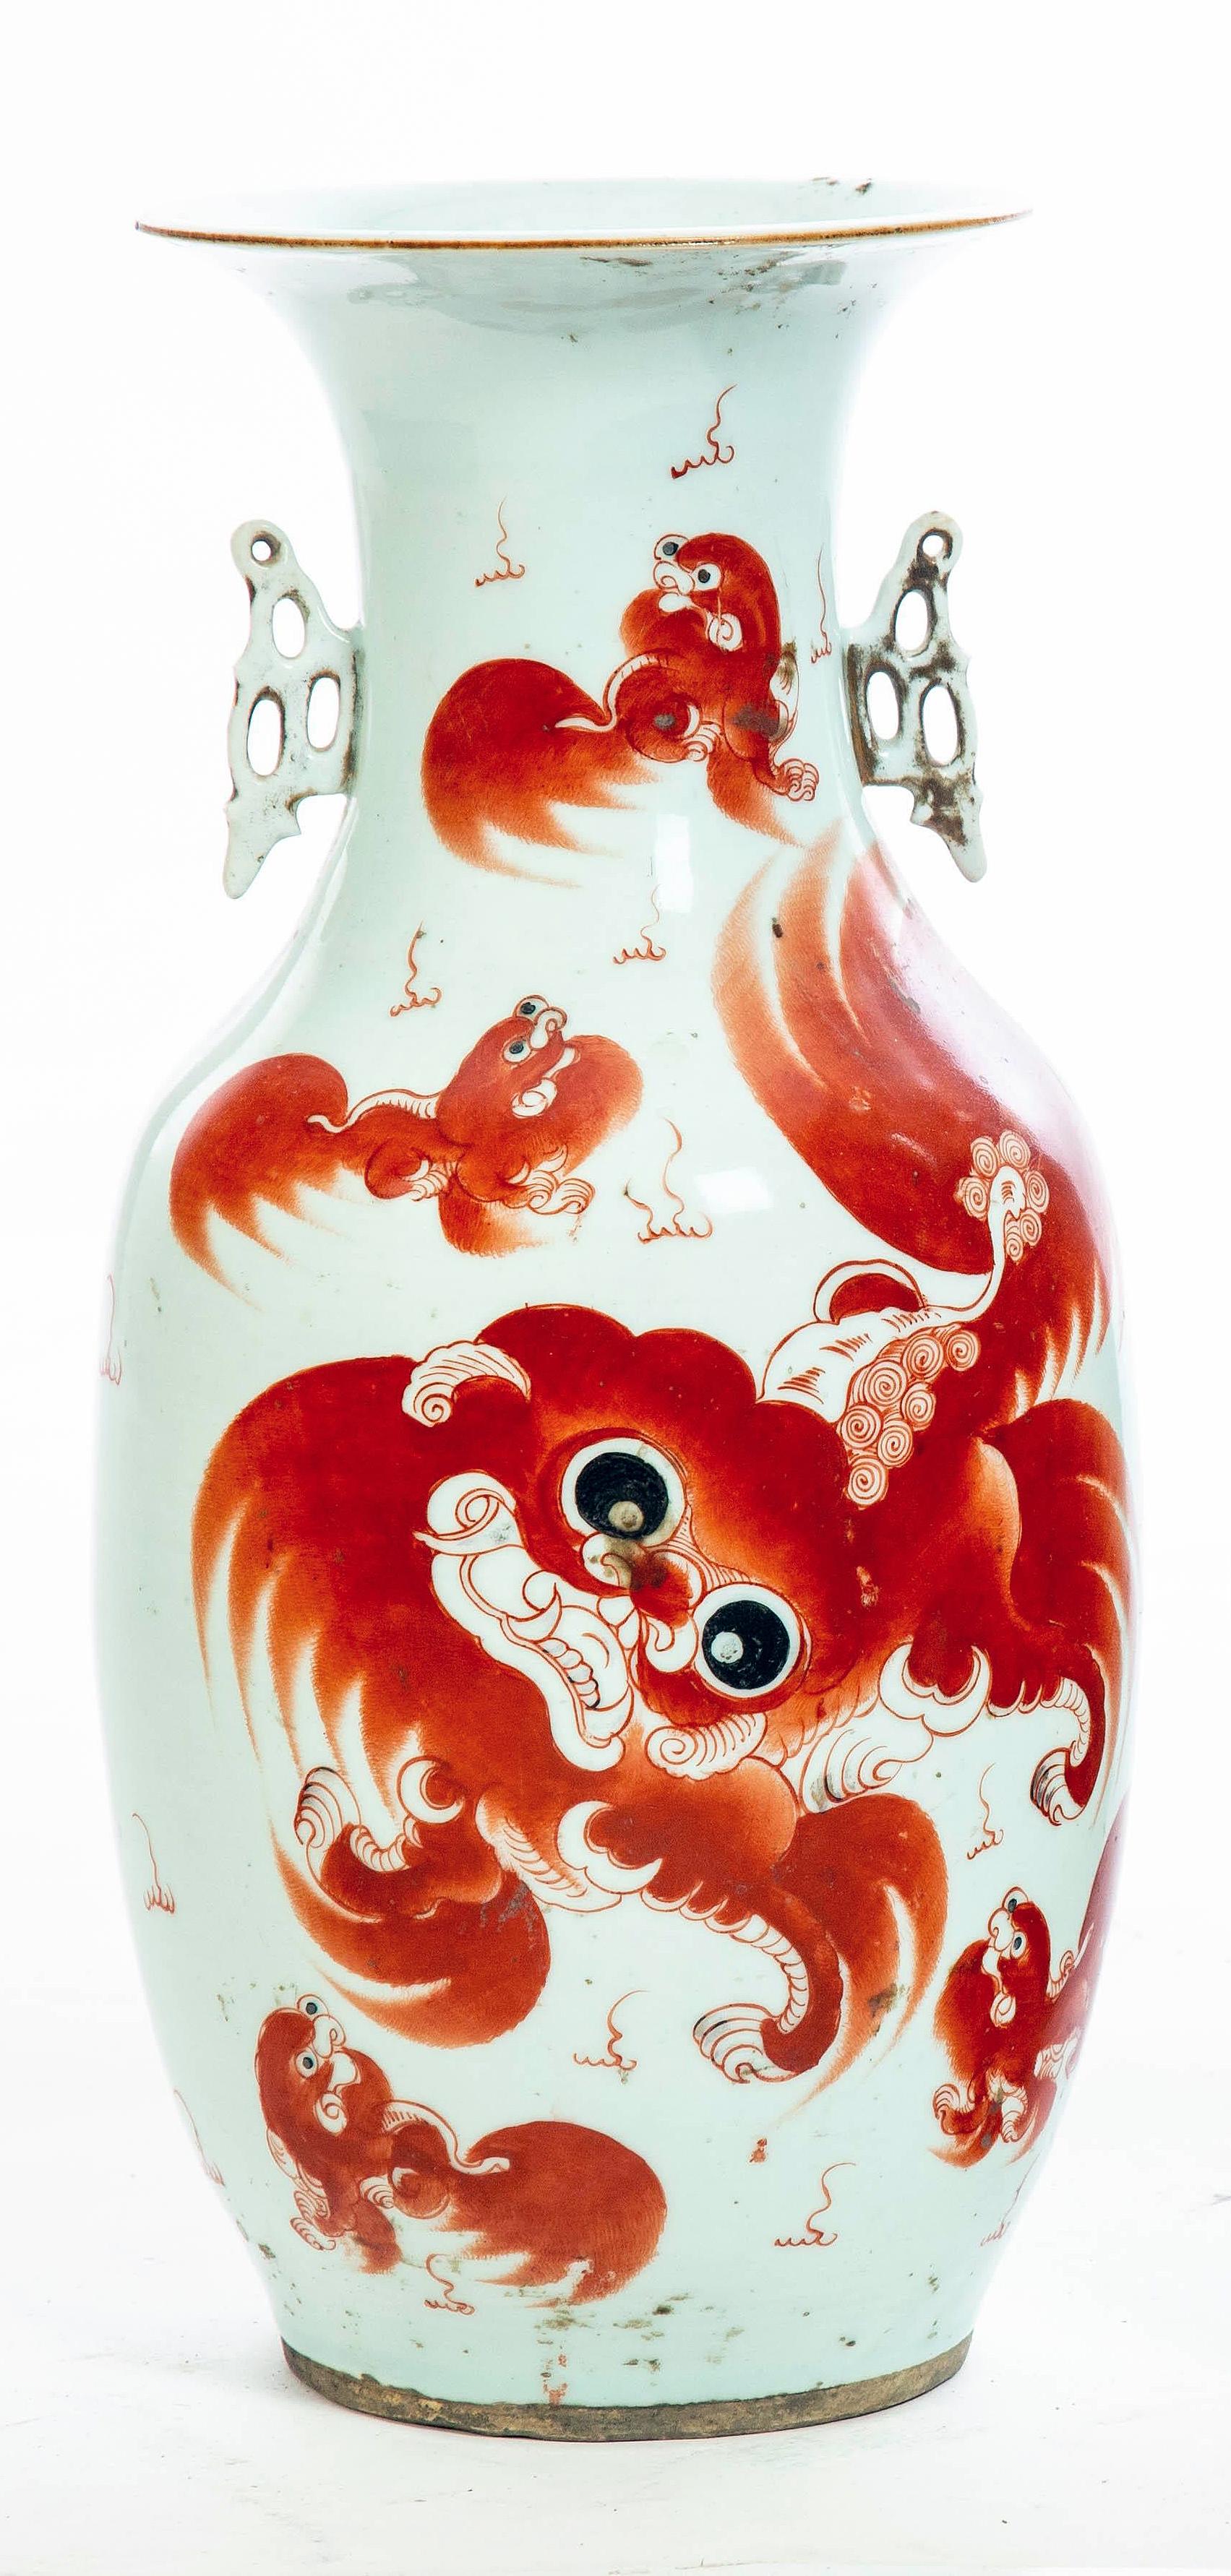 Pair of Antique Hand Painted Chinese Vases with Foo Dogs and Inscriptions
China, early 20th century
Porcelain
17 x 8 x 8 inches

Painted in iron red, these Foo Dogs or Imperial Guardian Lions are strong Feng Shui protection symbols which were